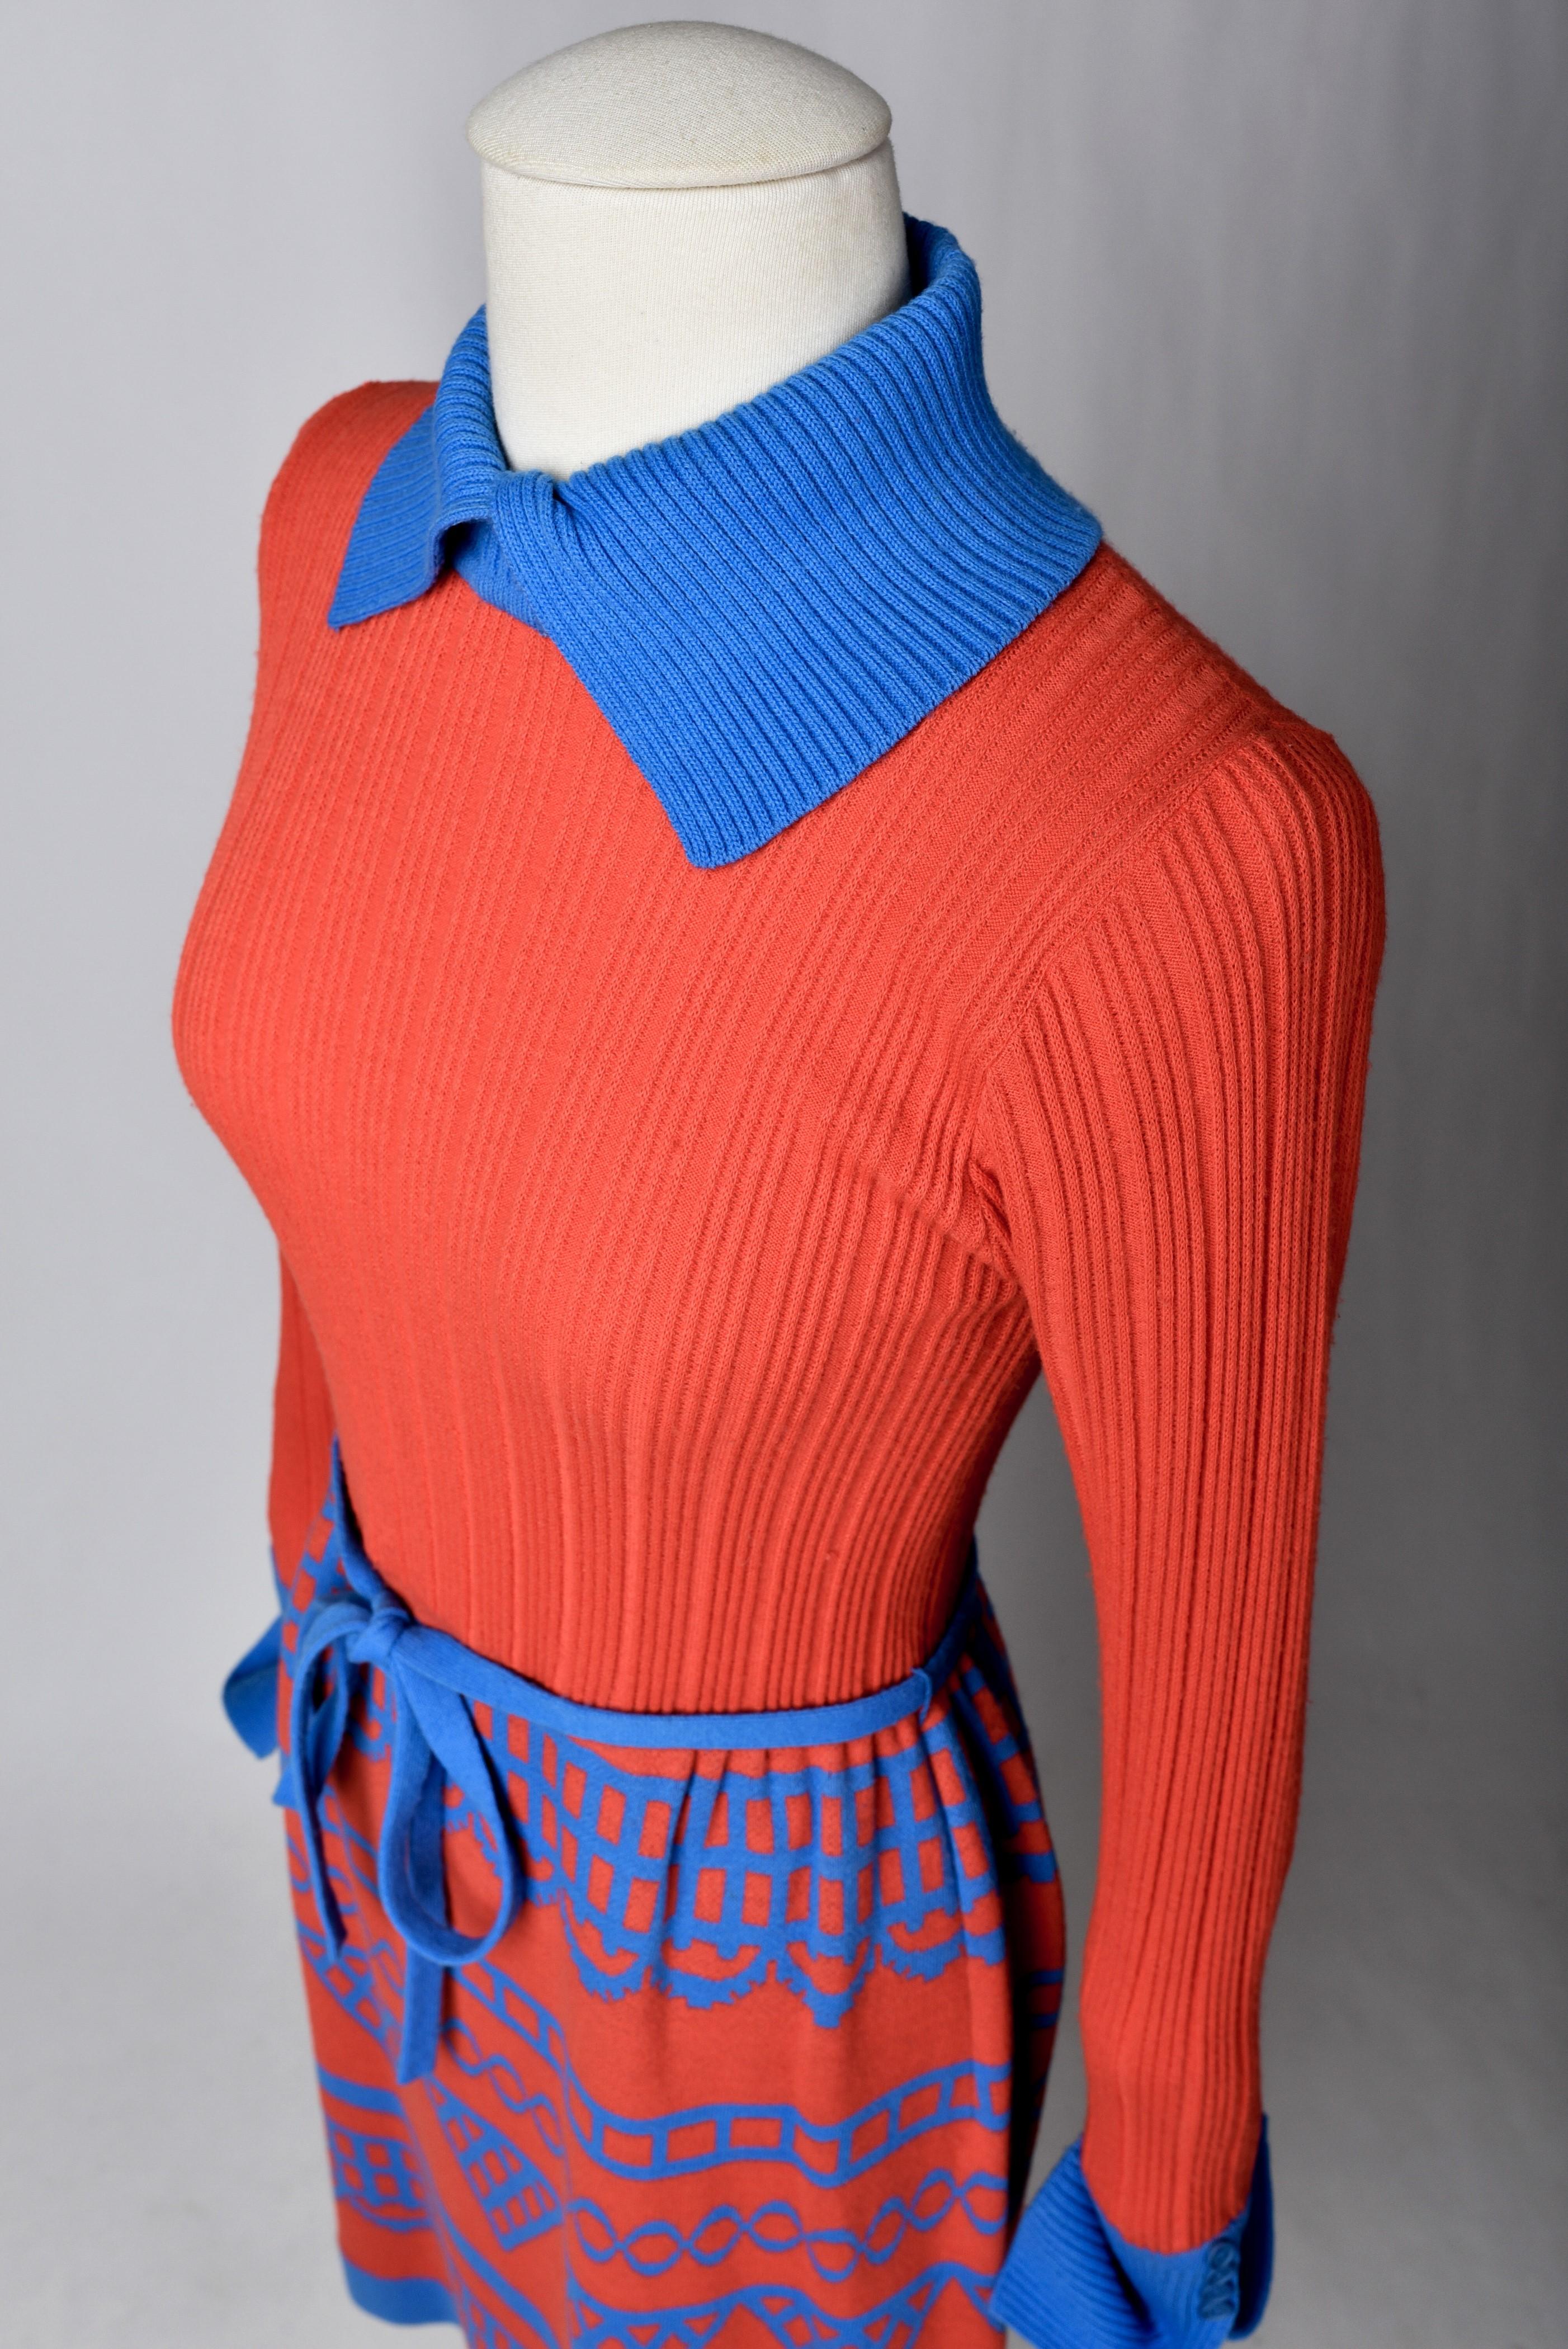 A Louis Féraud wool knit Dress by Rembrandt Circa 1975 For Sale 7